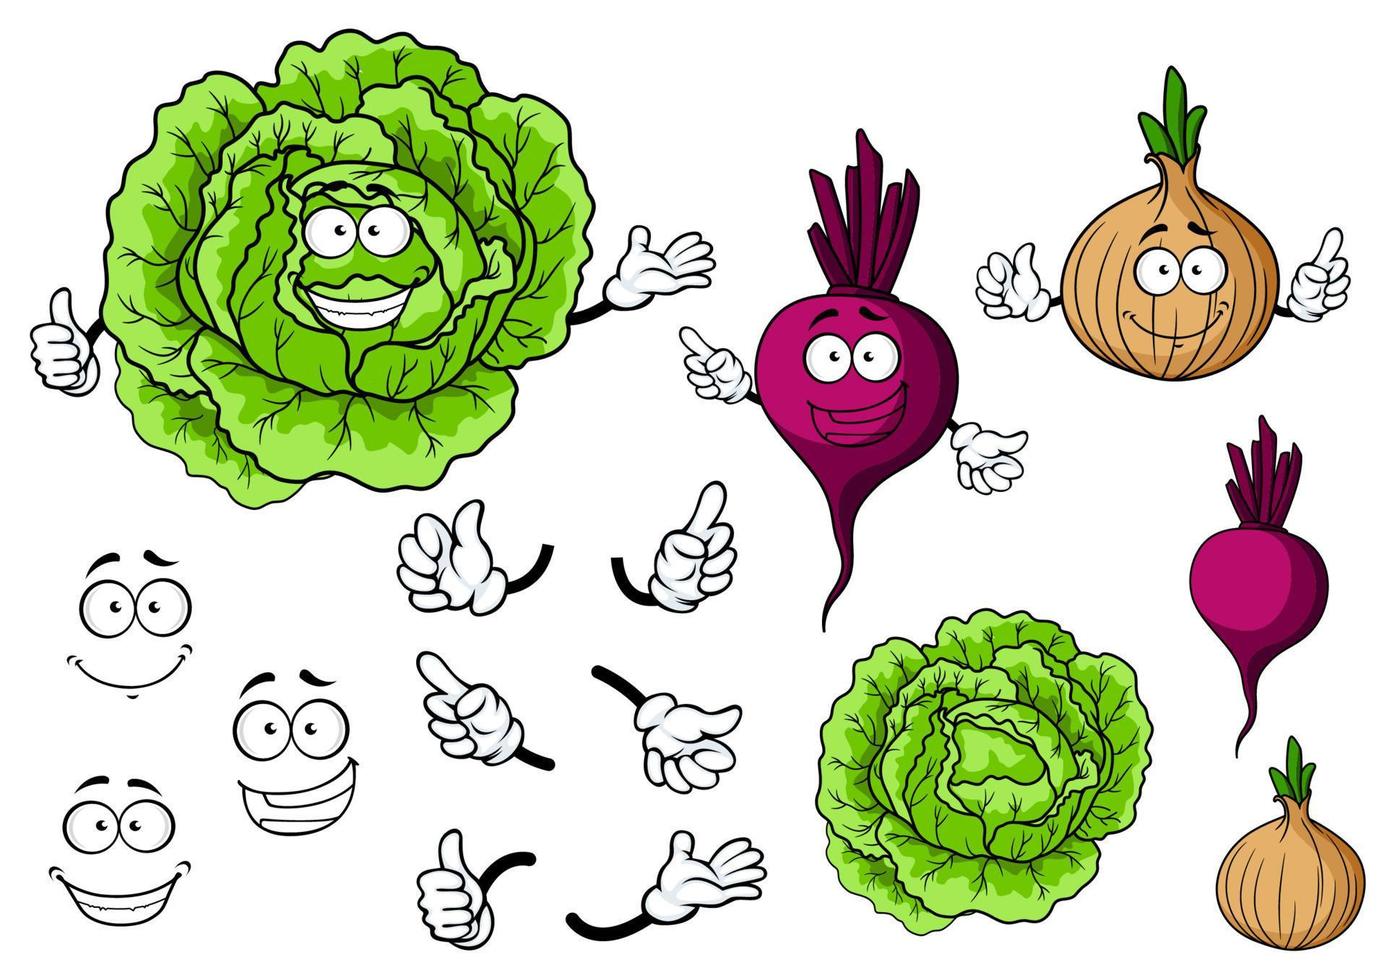 Cute cartoon cabbage, beet, onion vegetable characters vector